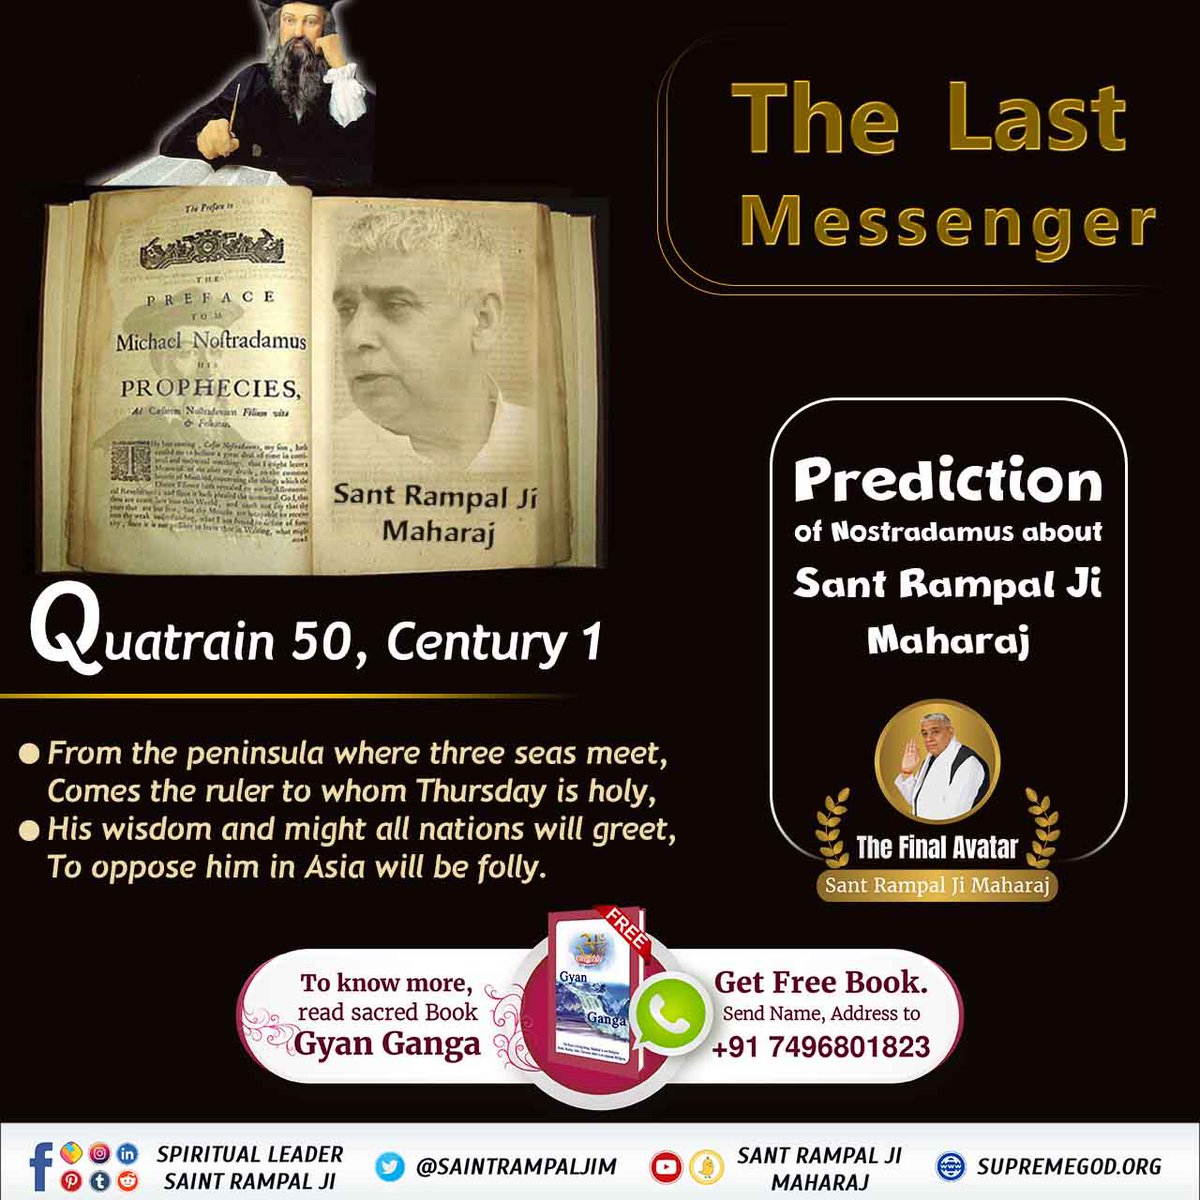 #आदि_सनातनधर्म_होगाप्रतिष्ठित
Prediction of Nostradamus about Sant Rampal Ji Maharaj
Quatrain 50, Century 1
🔶 From the peninsula where three seas meet, Comes the ruler to whom Thursday is holy.
🔶His wisdom and might all nations will greet, To oppose him in Aisa will be folly.